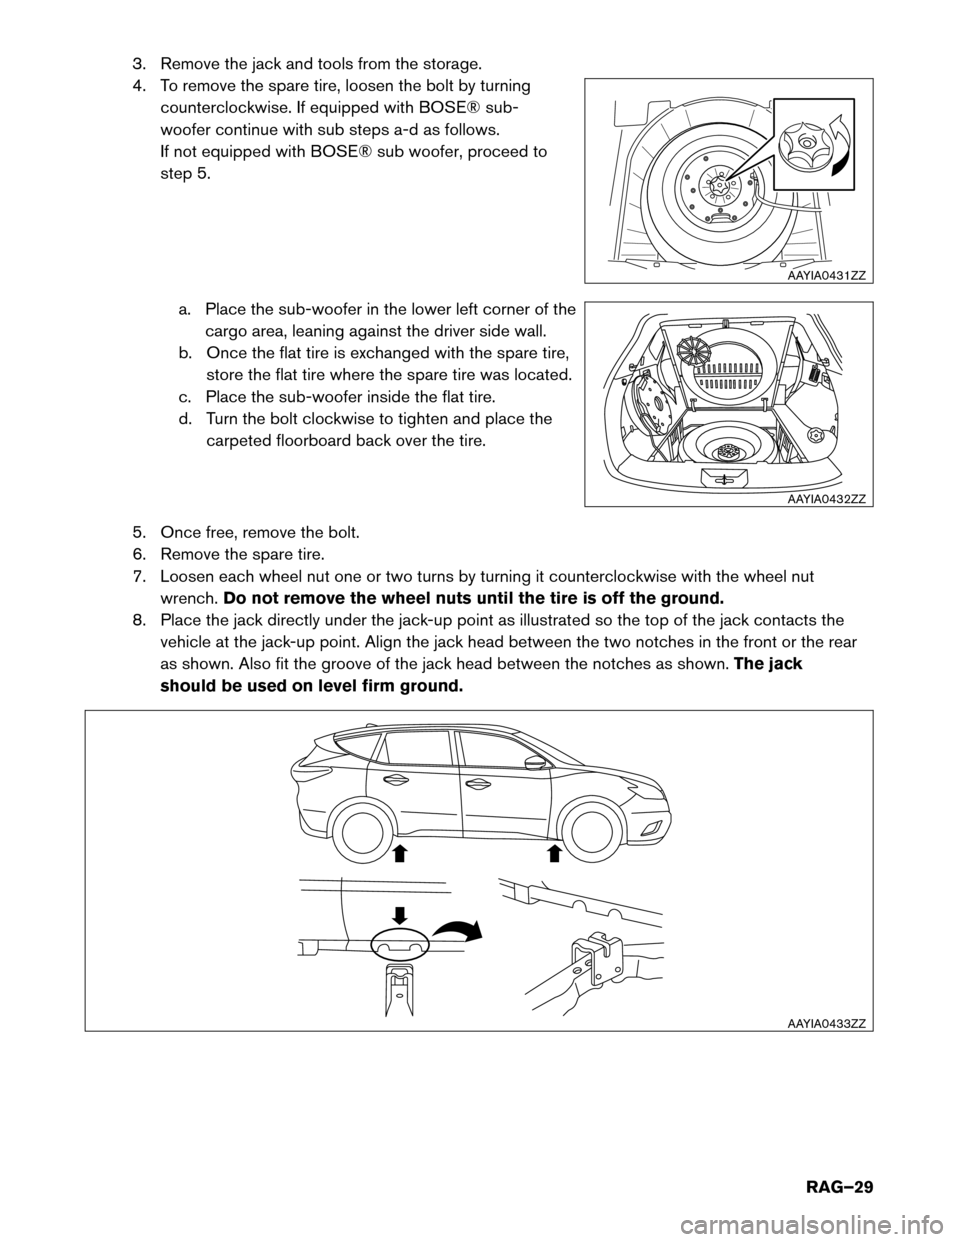 NISSAN MURANO HYBRID 2016 3.G Roadside Assistance Guide 3. Remove the jack and tools from the storage.
4.
To remove the spare tire, loosen the bolt by turning
counterclockwise. If equipped with BOSE® sub-
woofer continue with sub steps a-d as follows.
If 